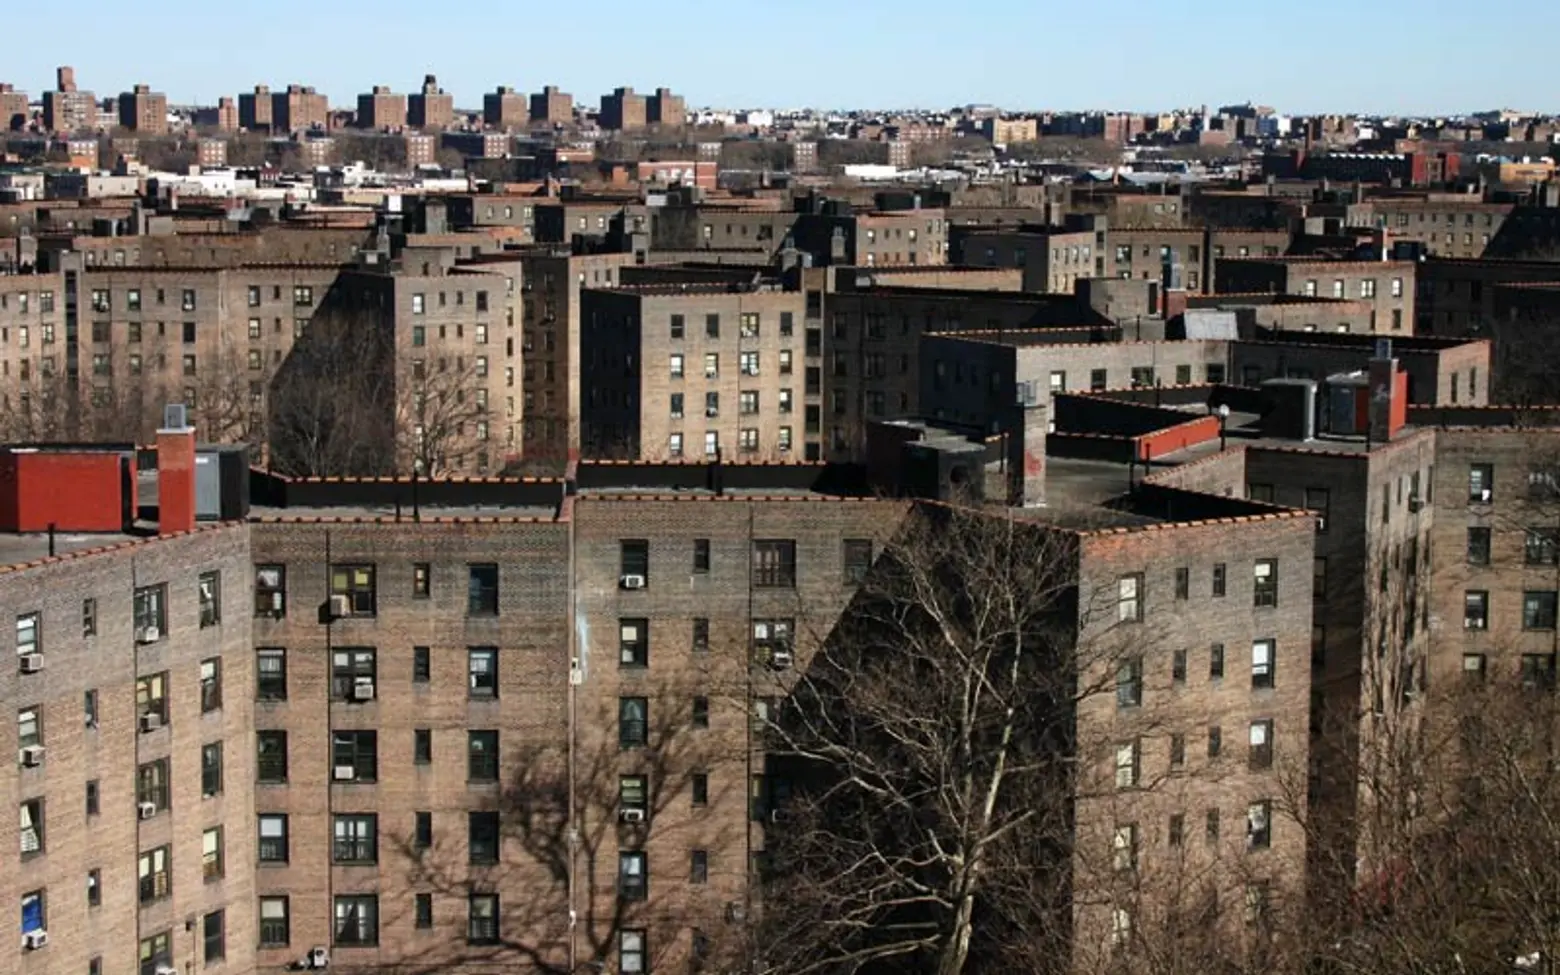 Cuomo declares state of emergency for NYCHA, creates independent monitor to oversee authority